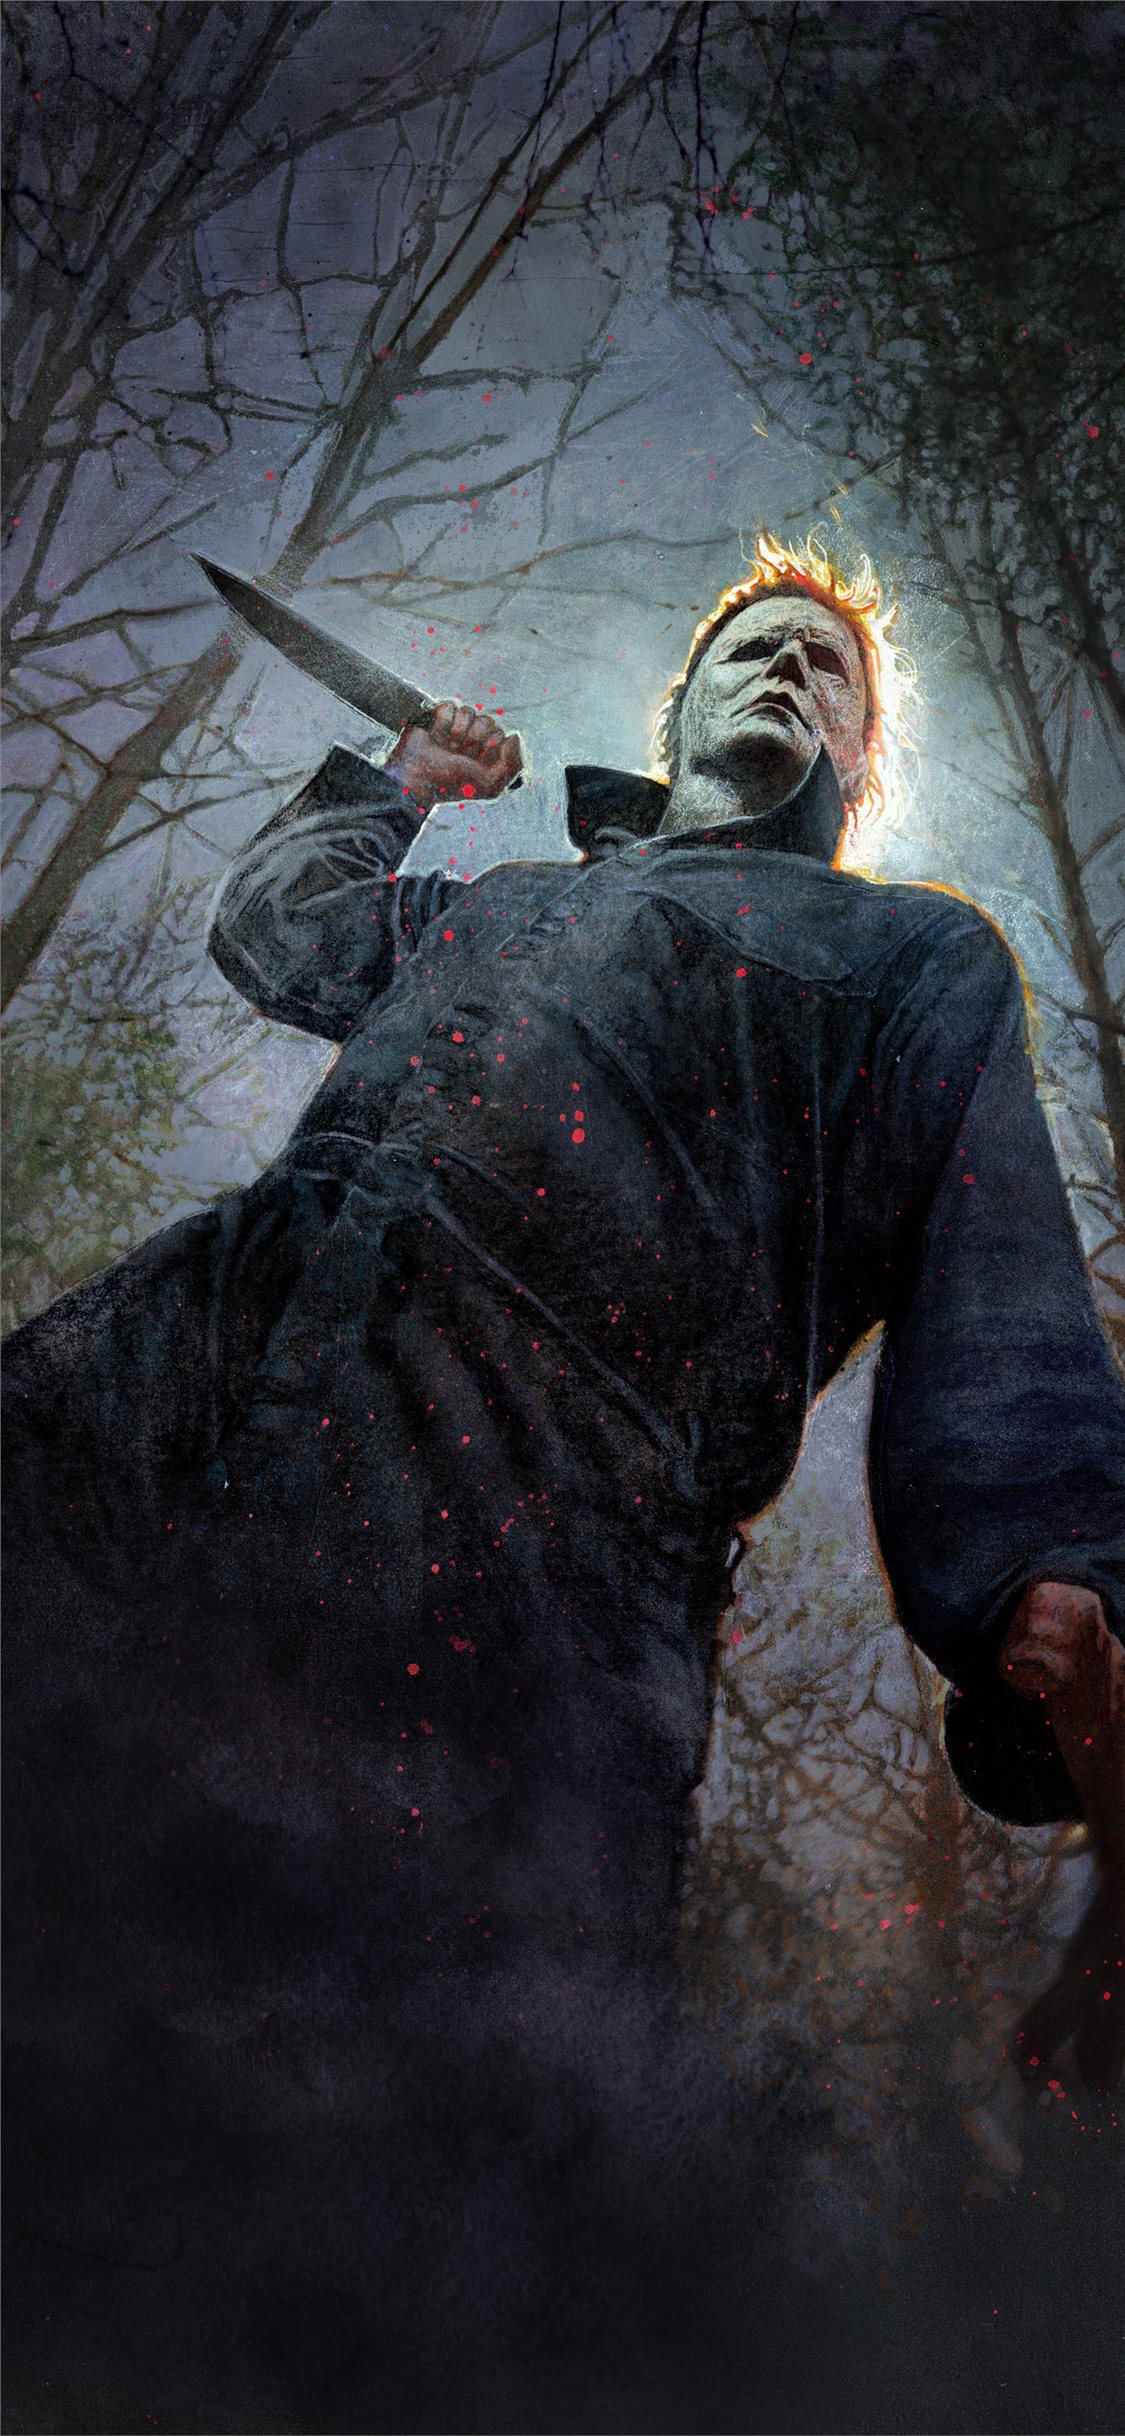 Download Be scared by this eerie aesthetic horror iPhone wallpaper  Wallpaper  Wallpaperscom